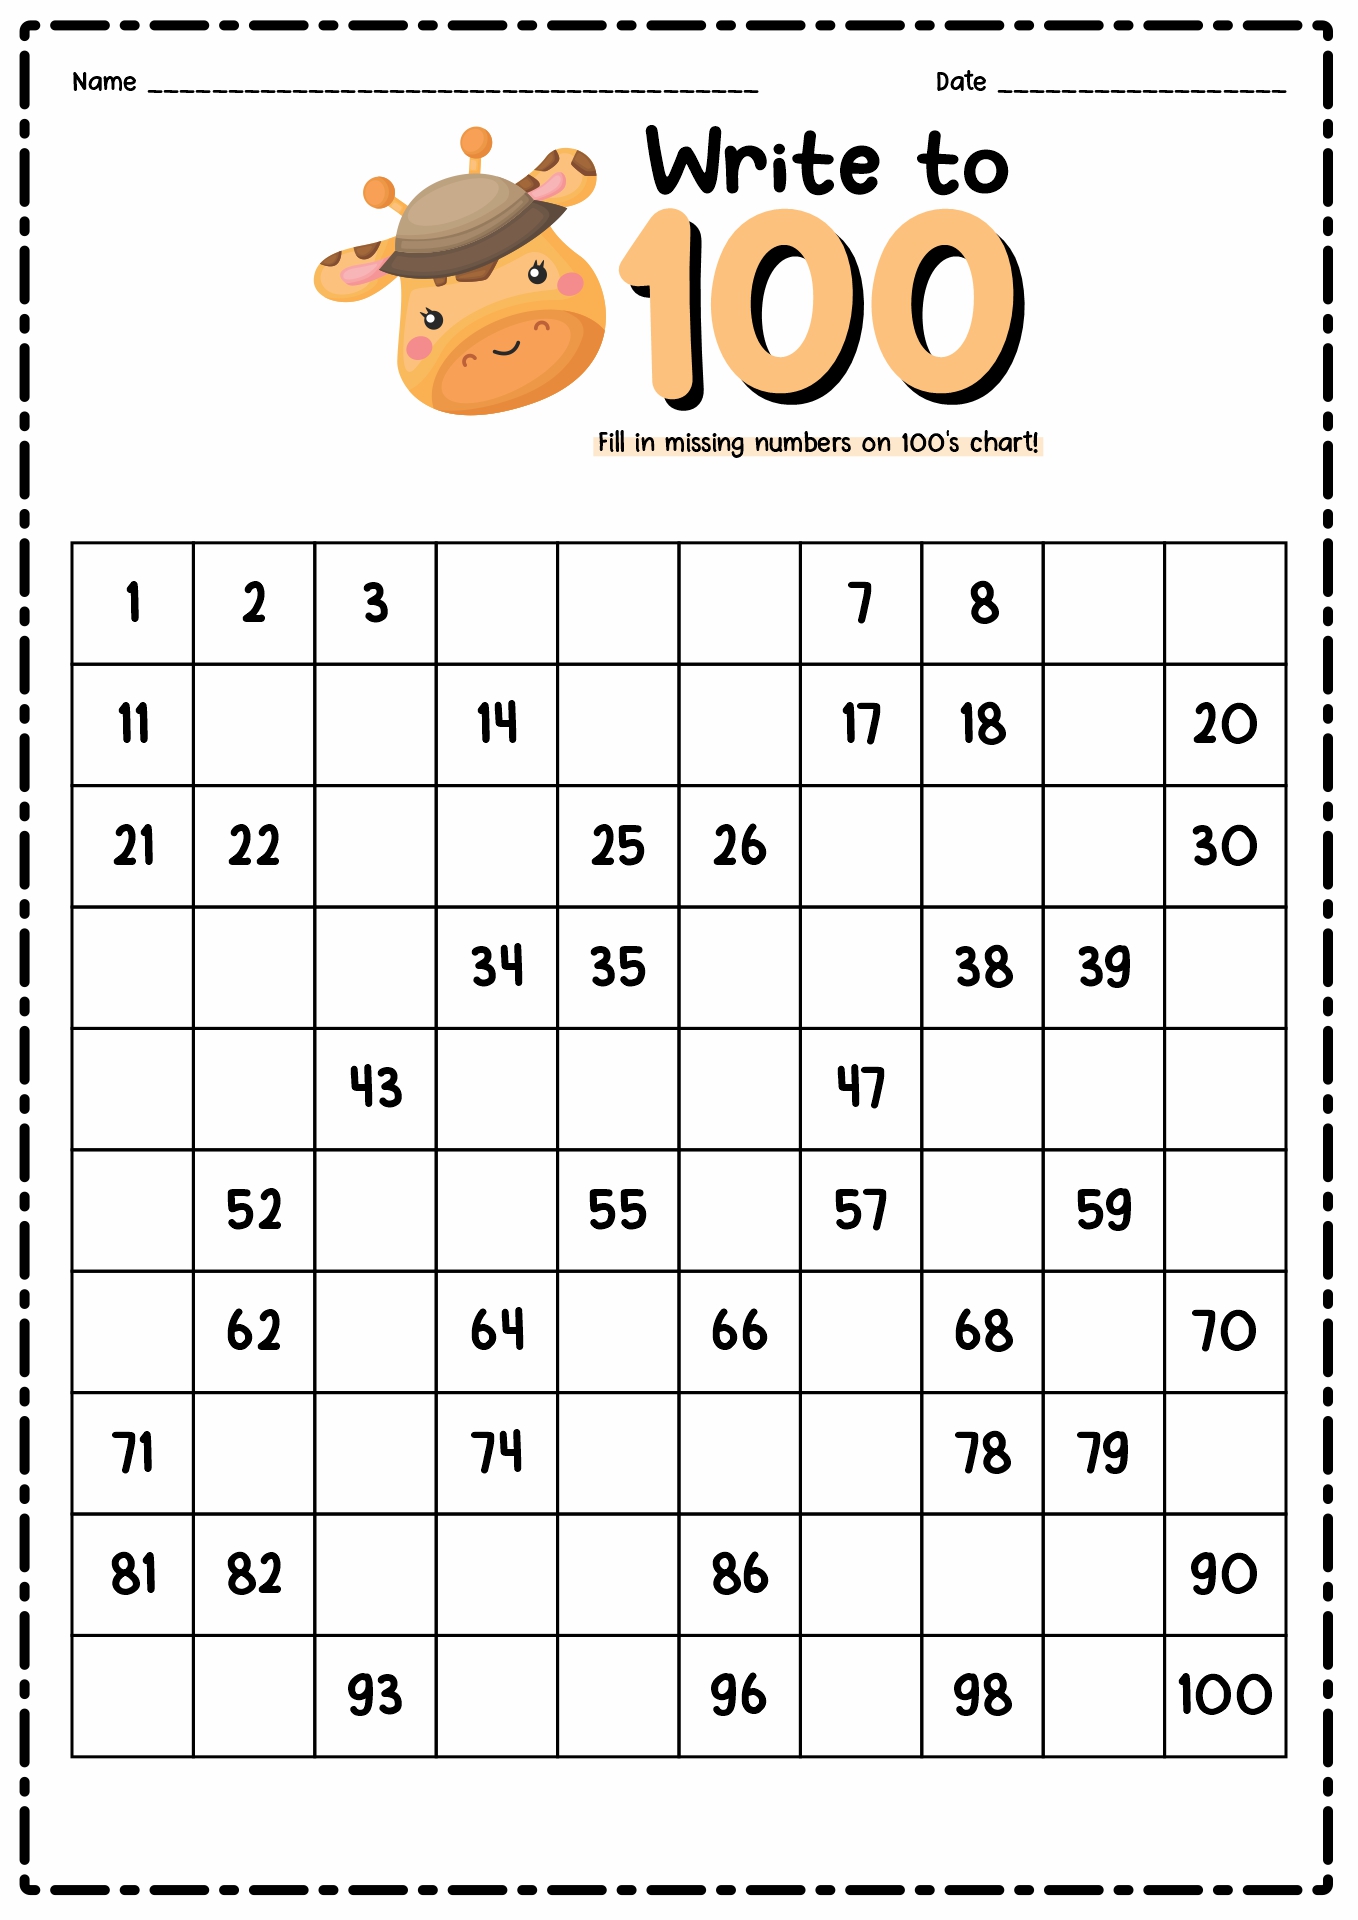 12-best-images-of-hundreds-square-worksheet-missing-puzzle-with-all